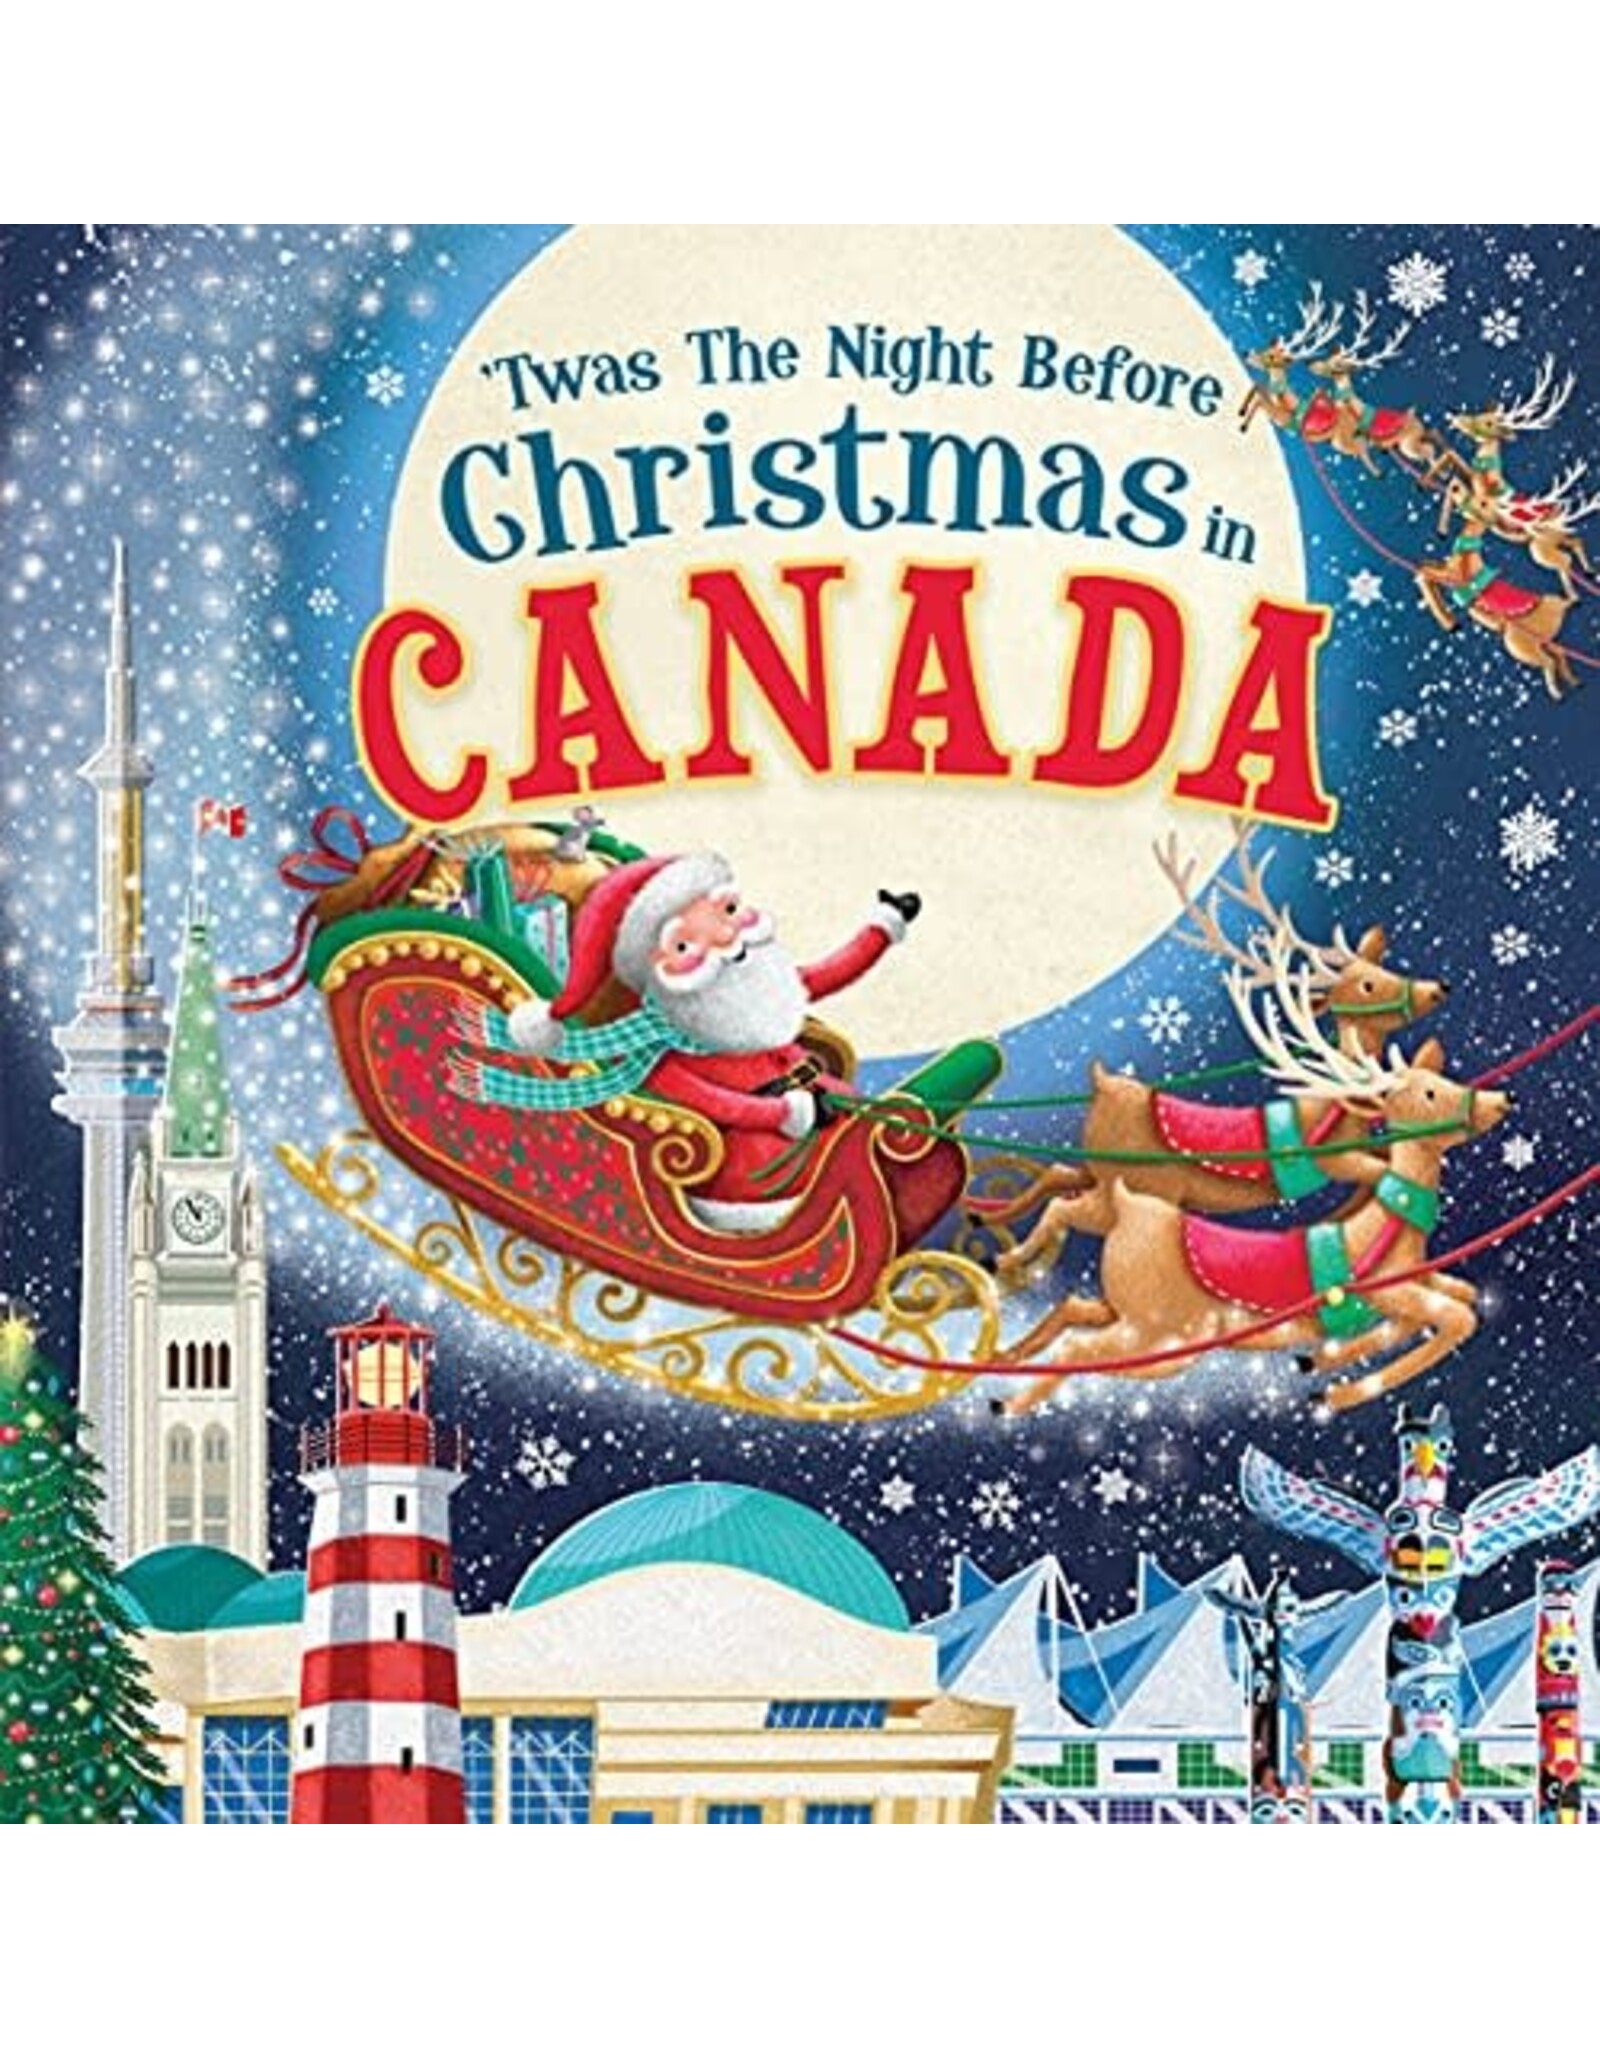 Twas the Night Before Christmas in Canada